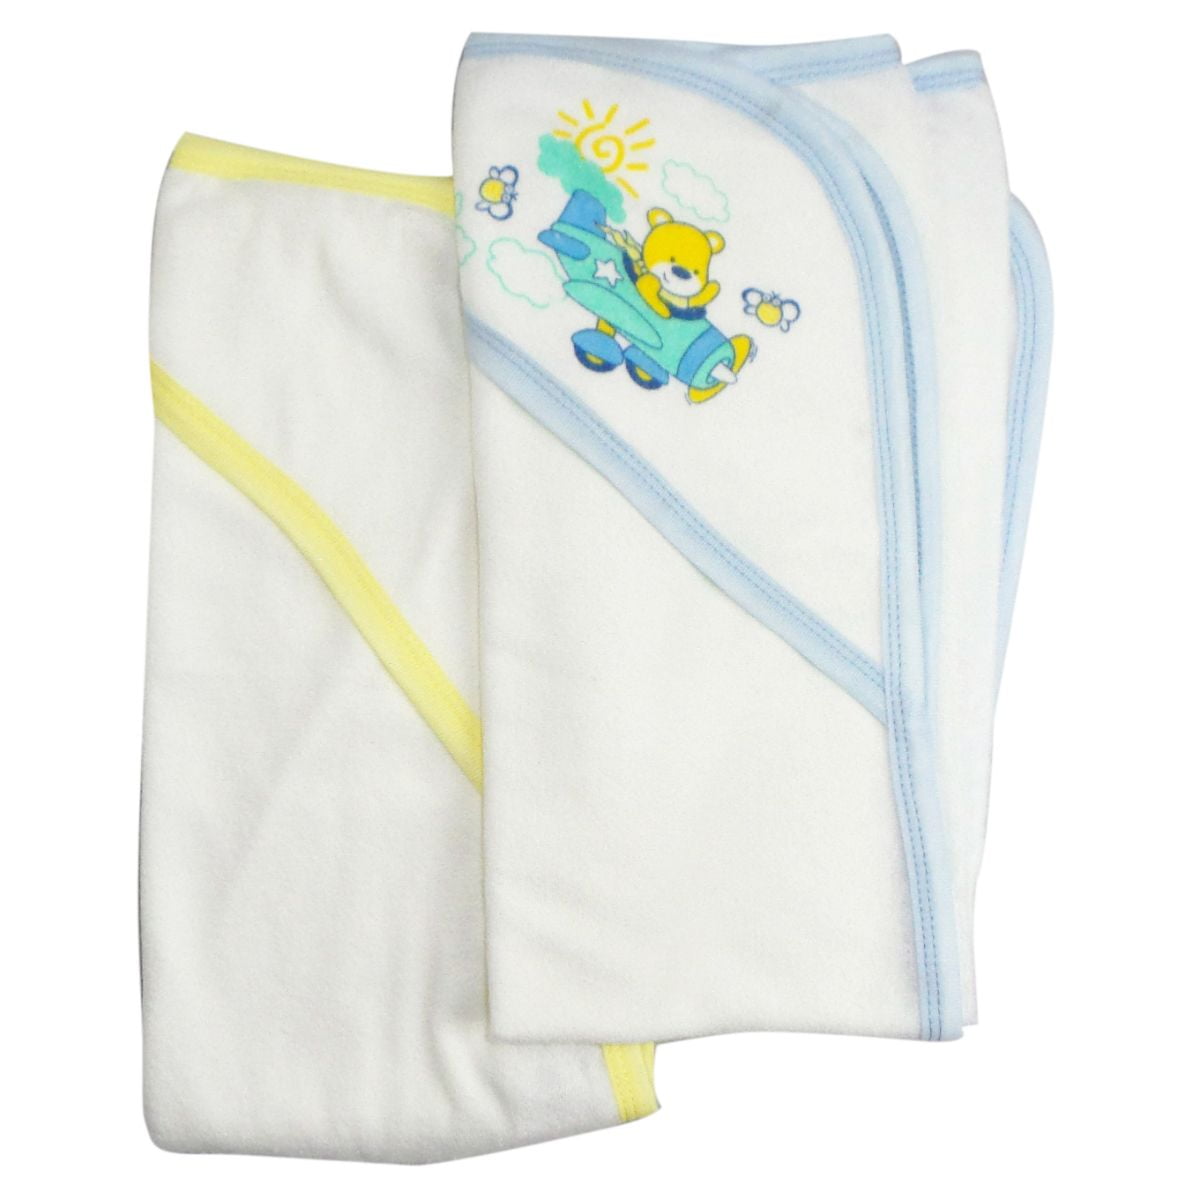 021b-blue-021b-yellow Infant Hooded Bath Towel, White & Yellow - Pack Of 2